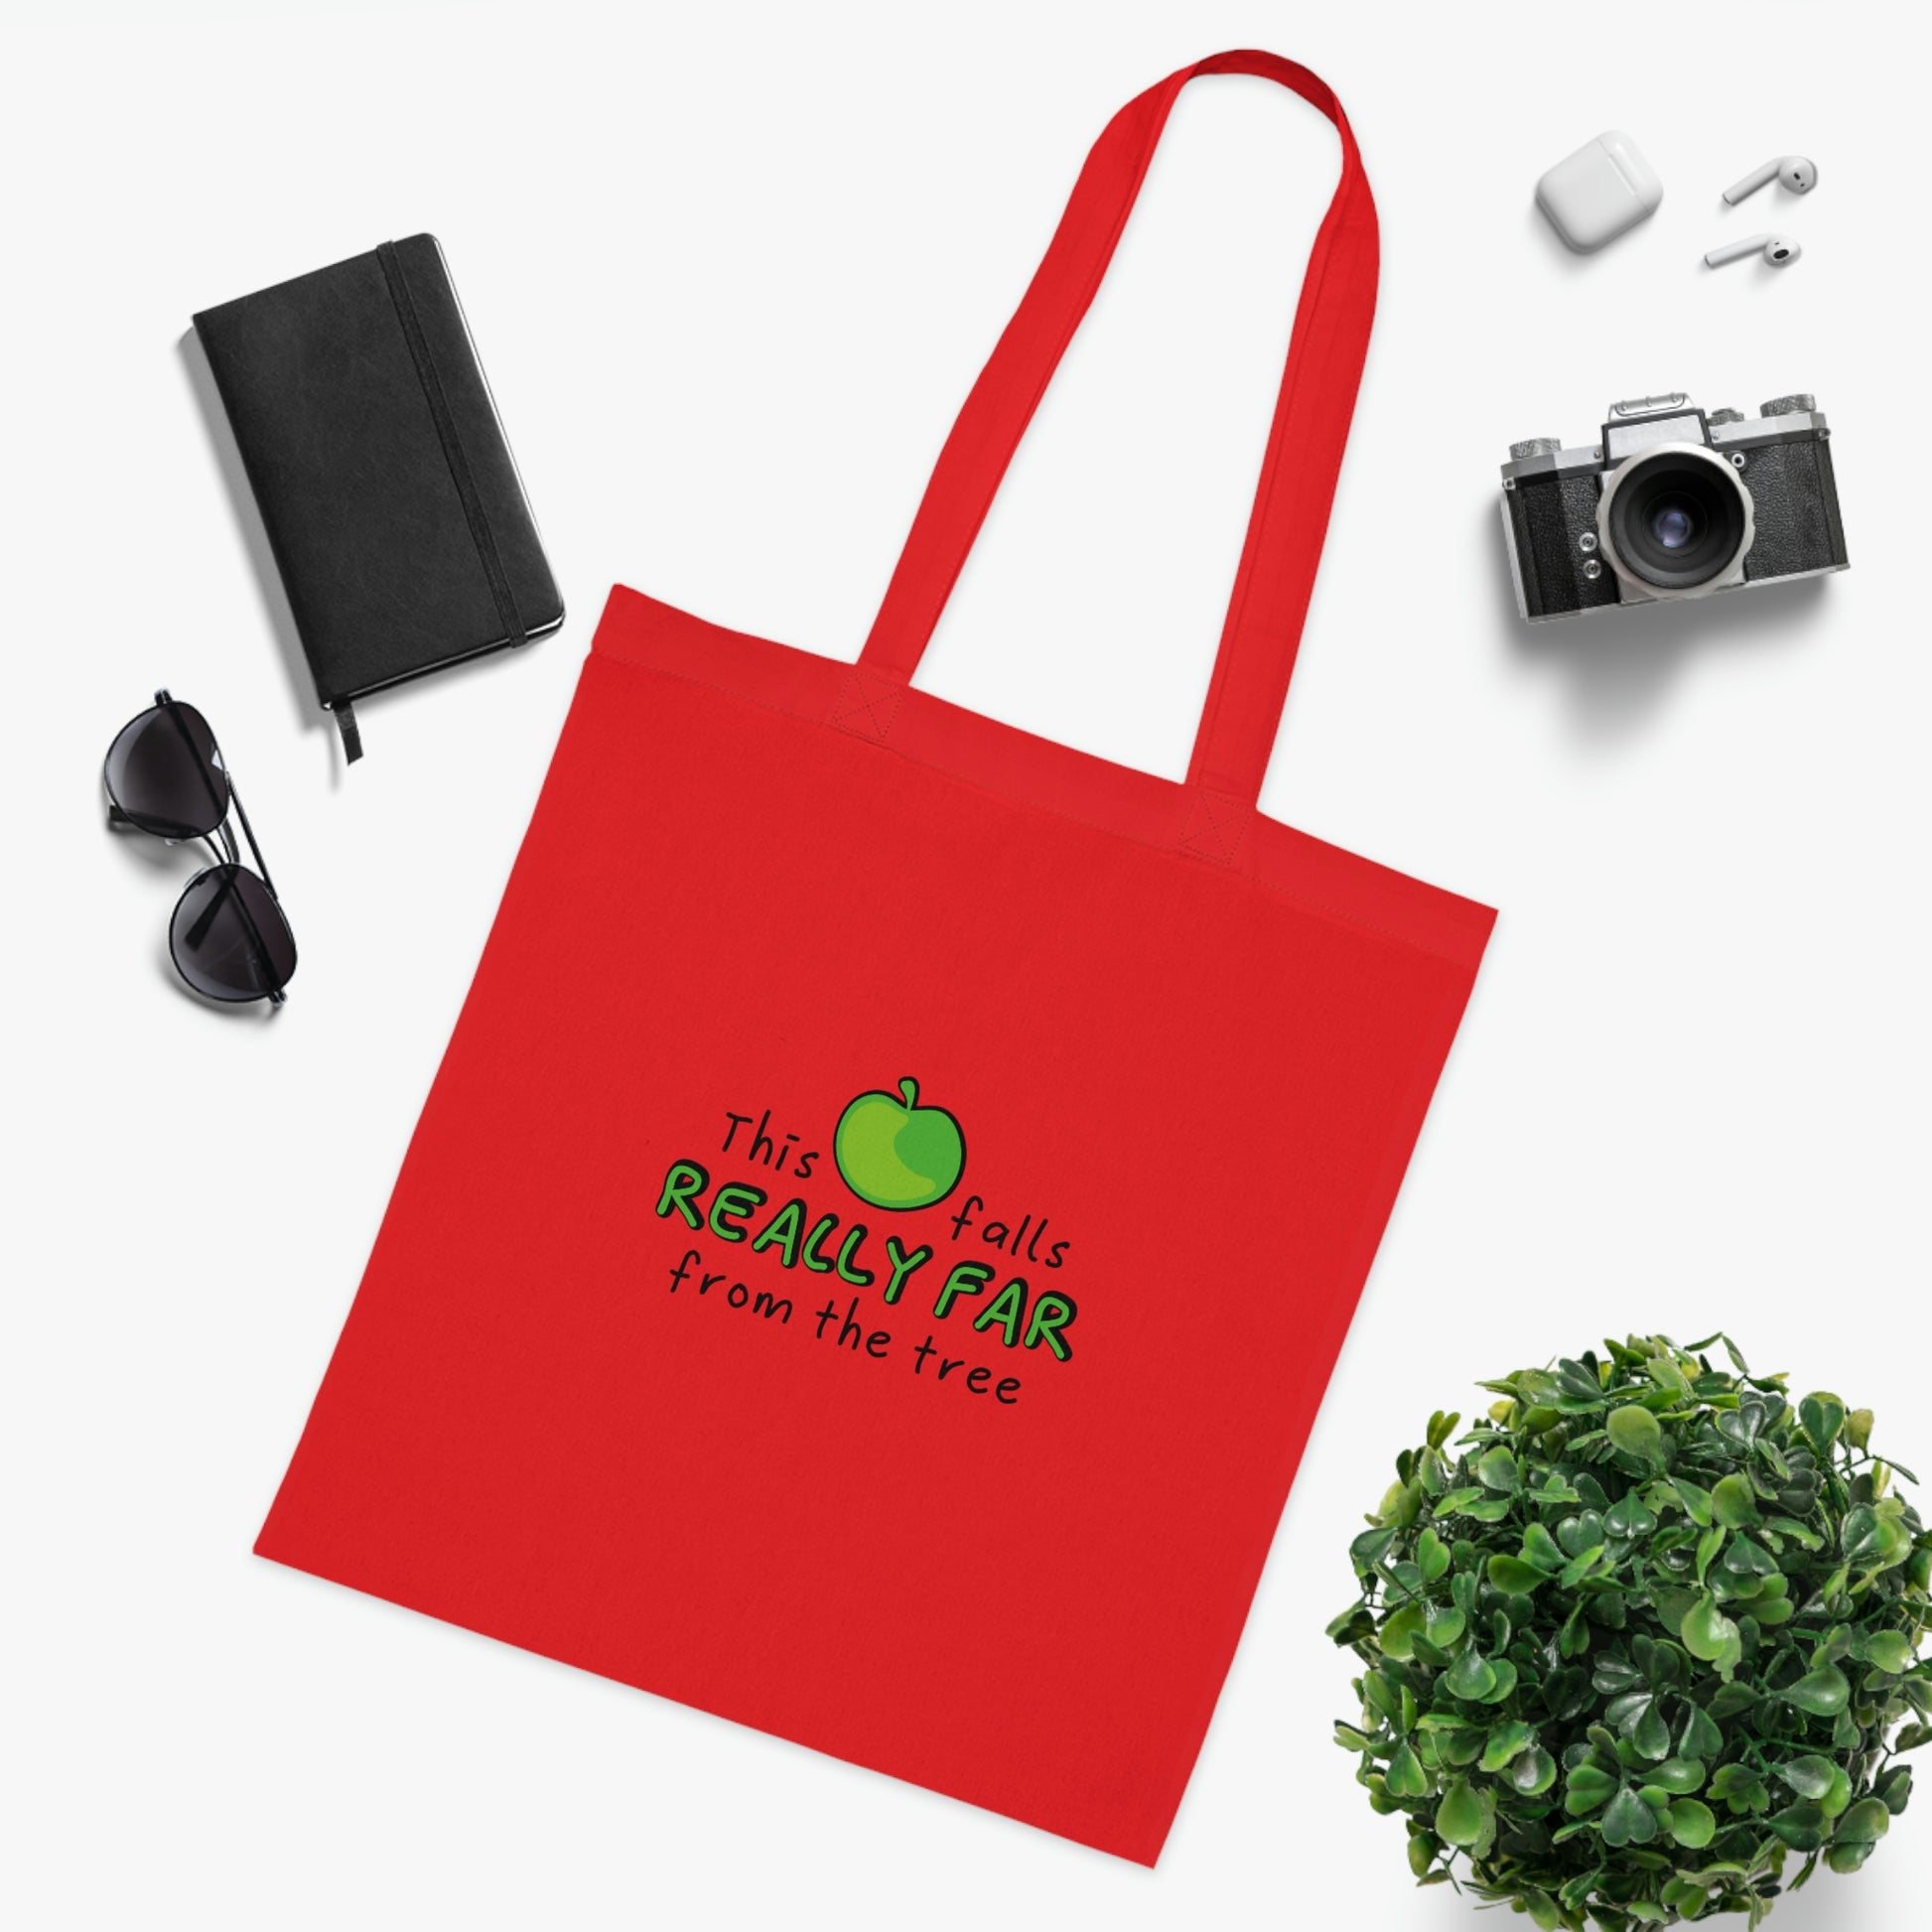 Weirdo | The most funny, sarcastic meme bags you will find at #weirdo! Check out this red, 100% cotton bag with the funny meme written at the front of the bag: This apple falls really far from the tree.